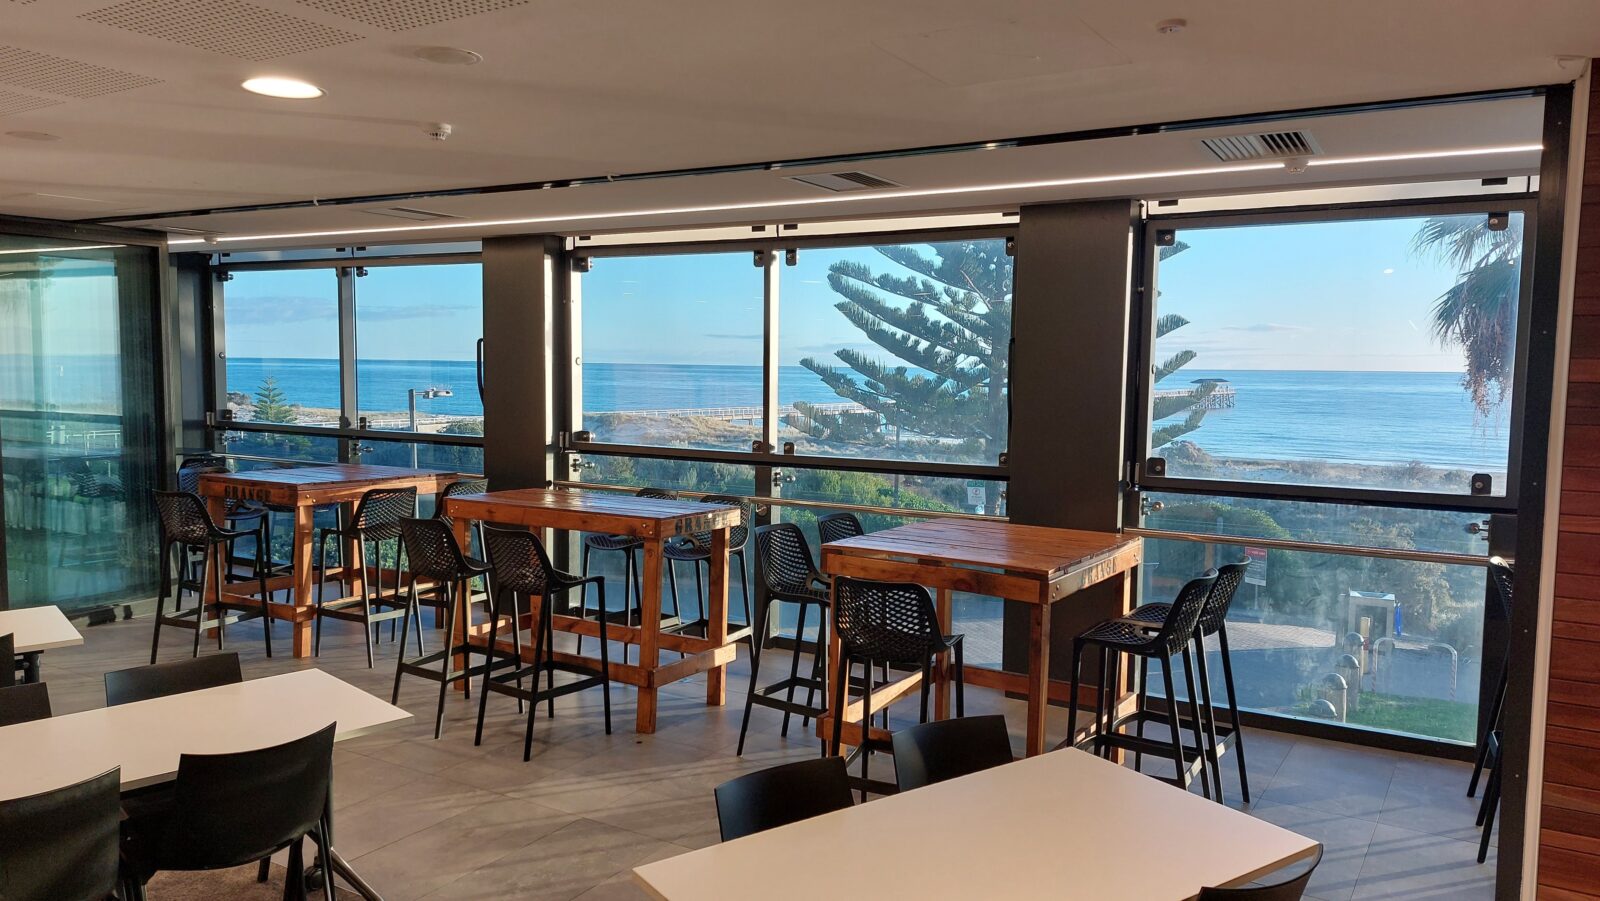 Sea views through our floor to ceiling dining room windows.